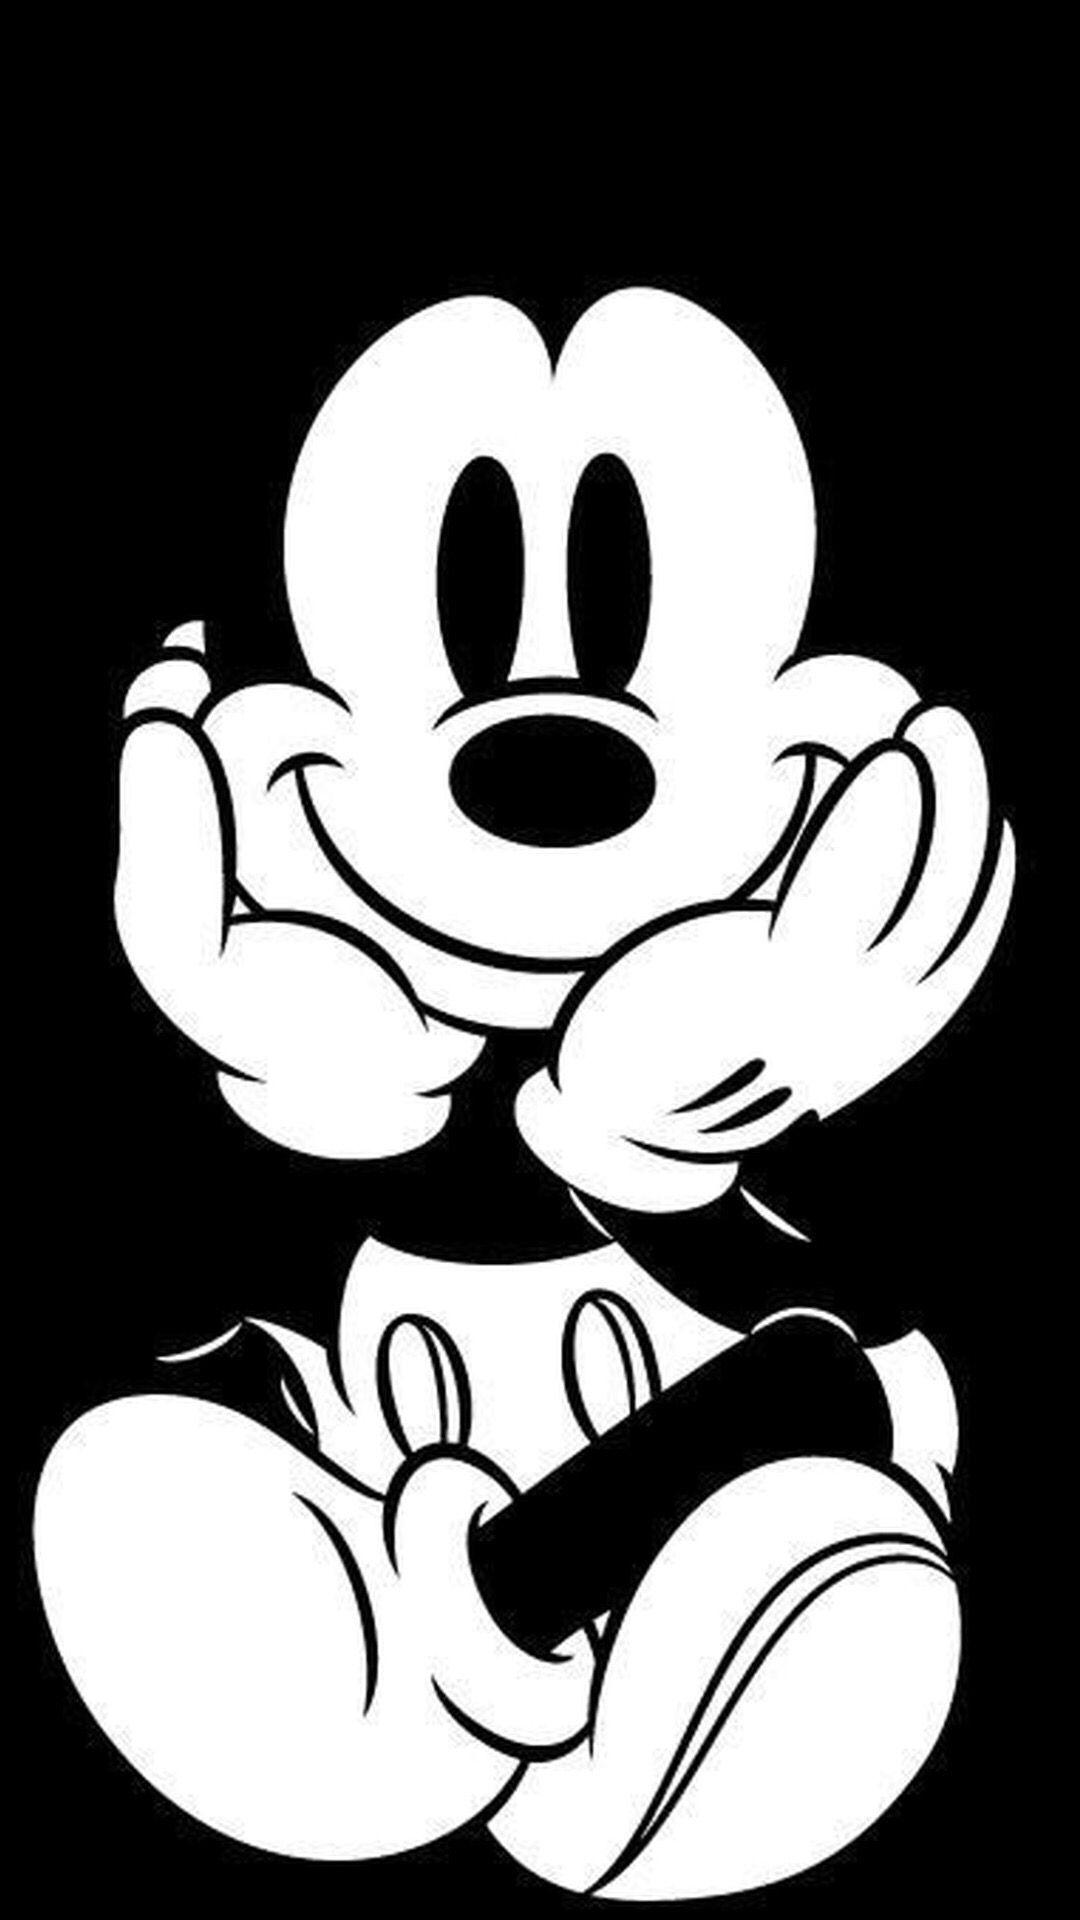 Mickey Mouse Black and White Wallpapers - Top Free Mickey ...